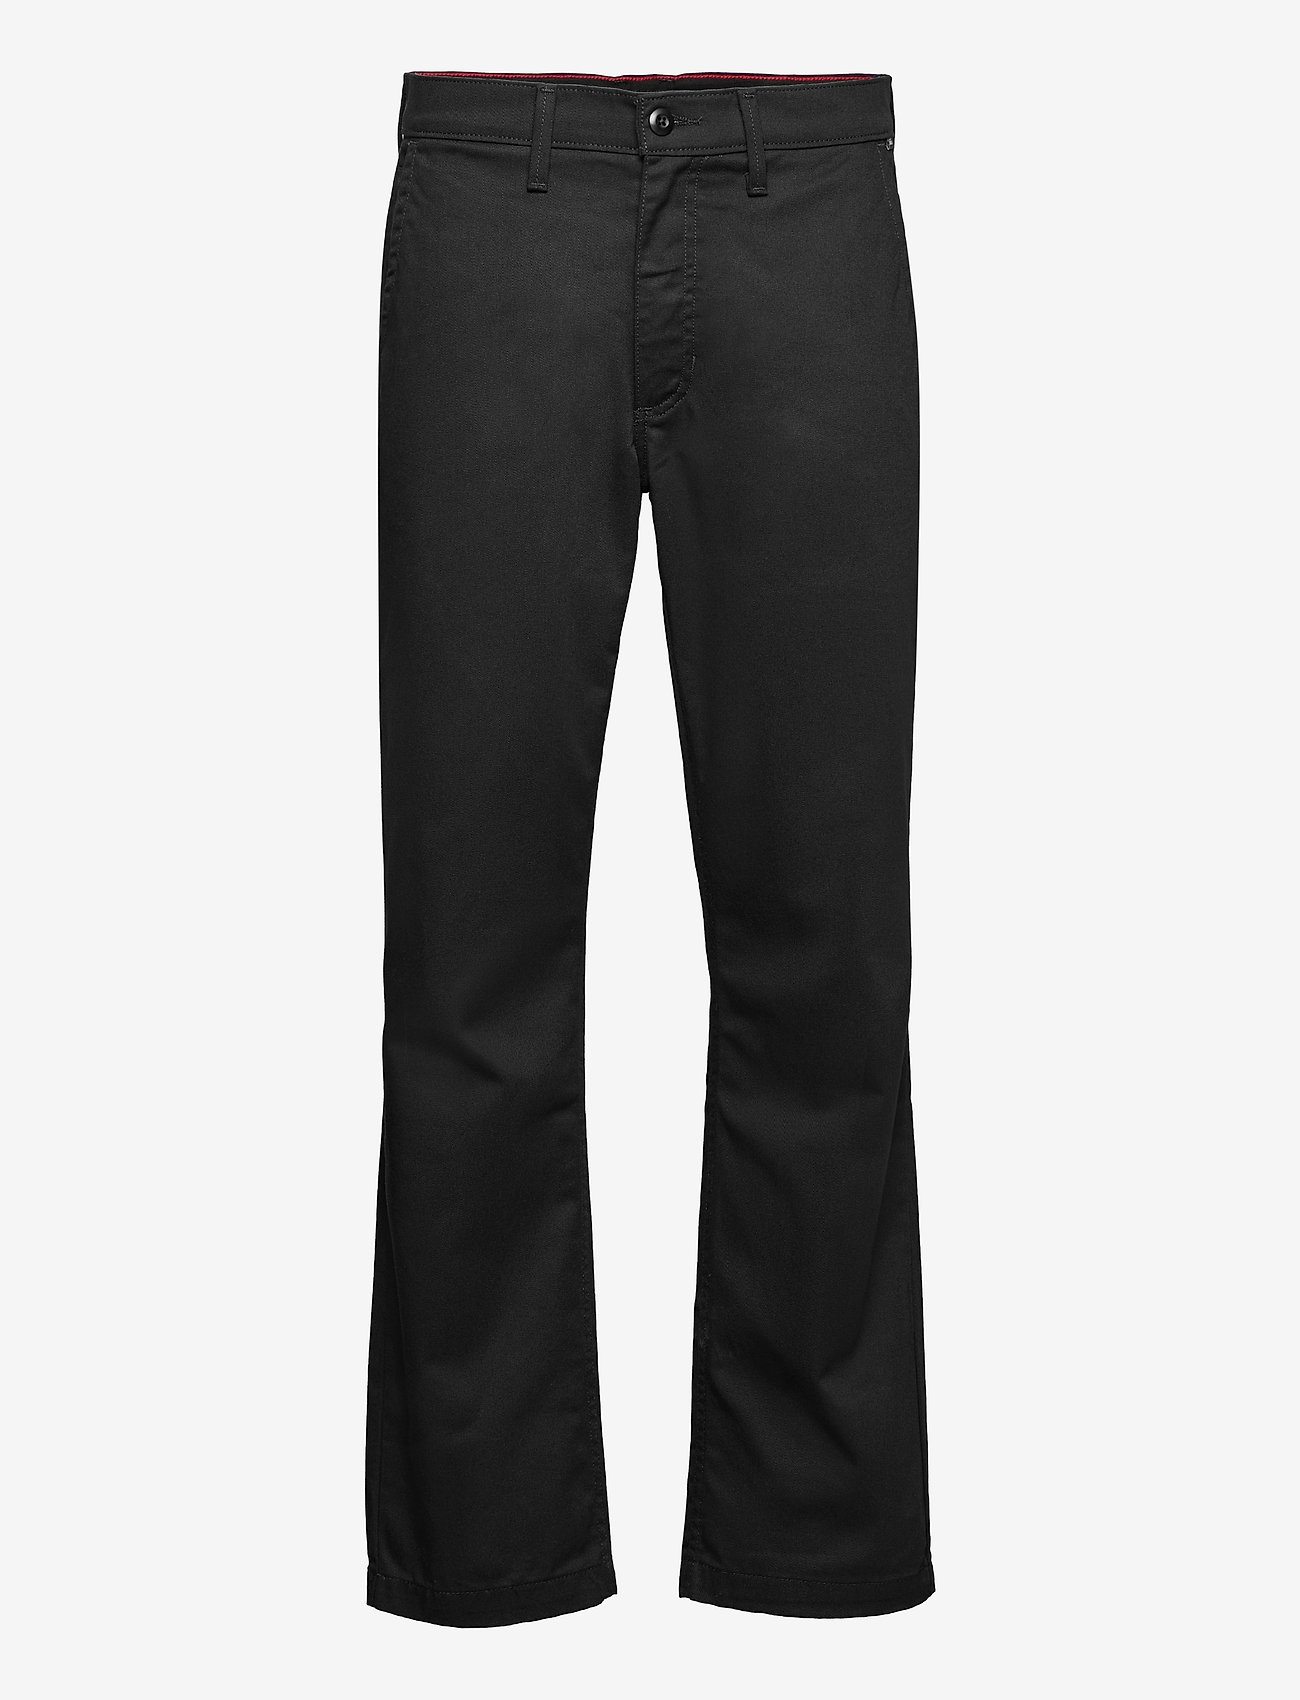 VANS - MN AUTHENTIC CHINO RELAXED PANT - sportsbukser - black - 0